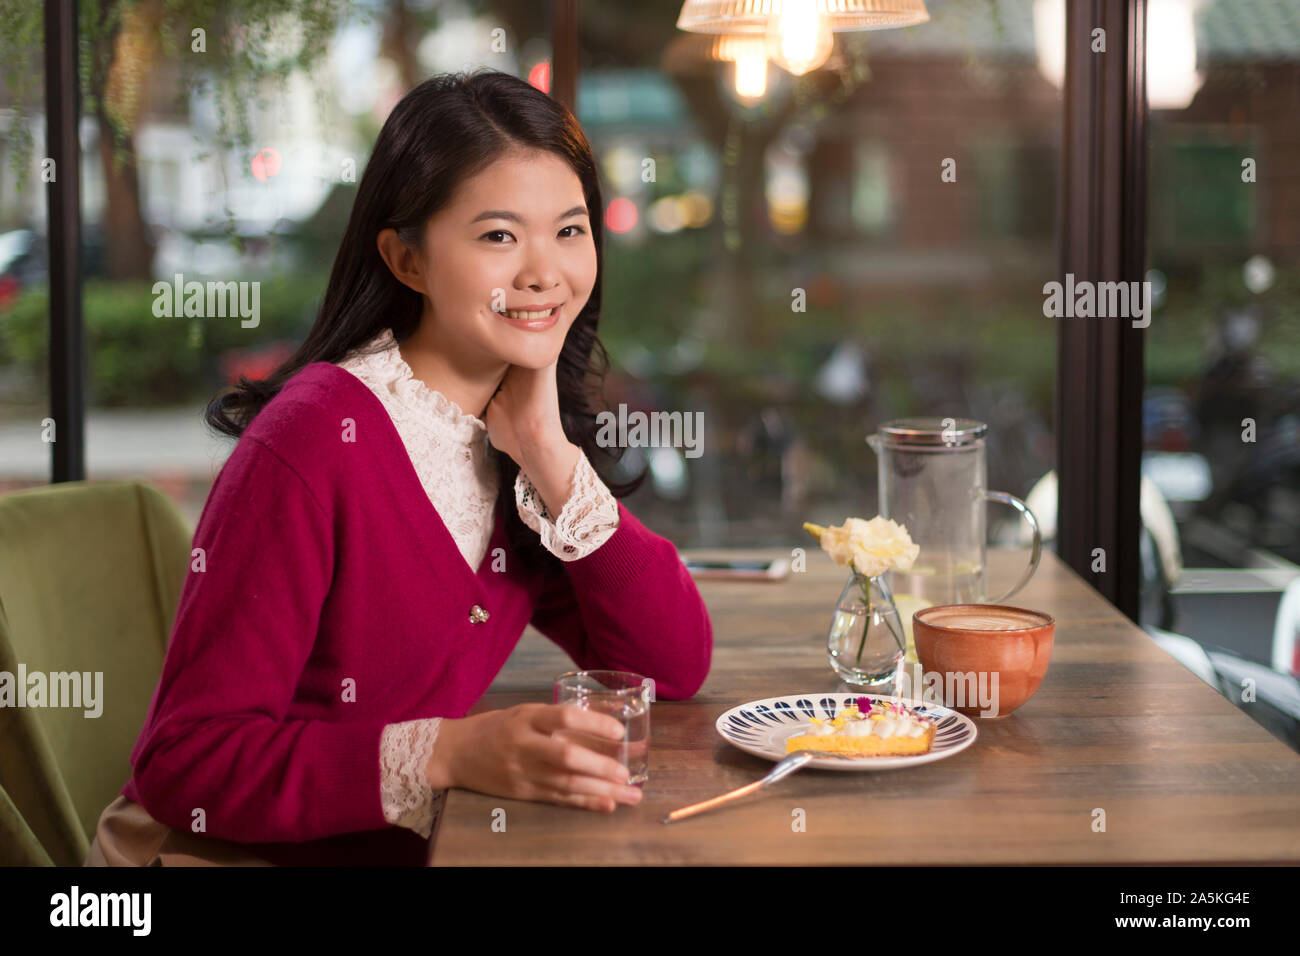 Woman sitting at table in cafe Stock Photo